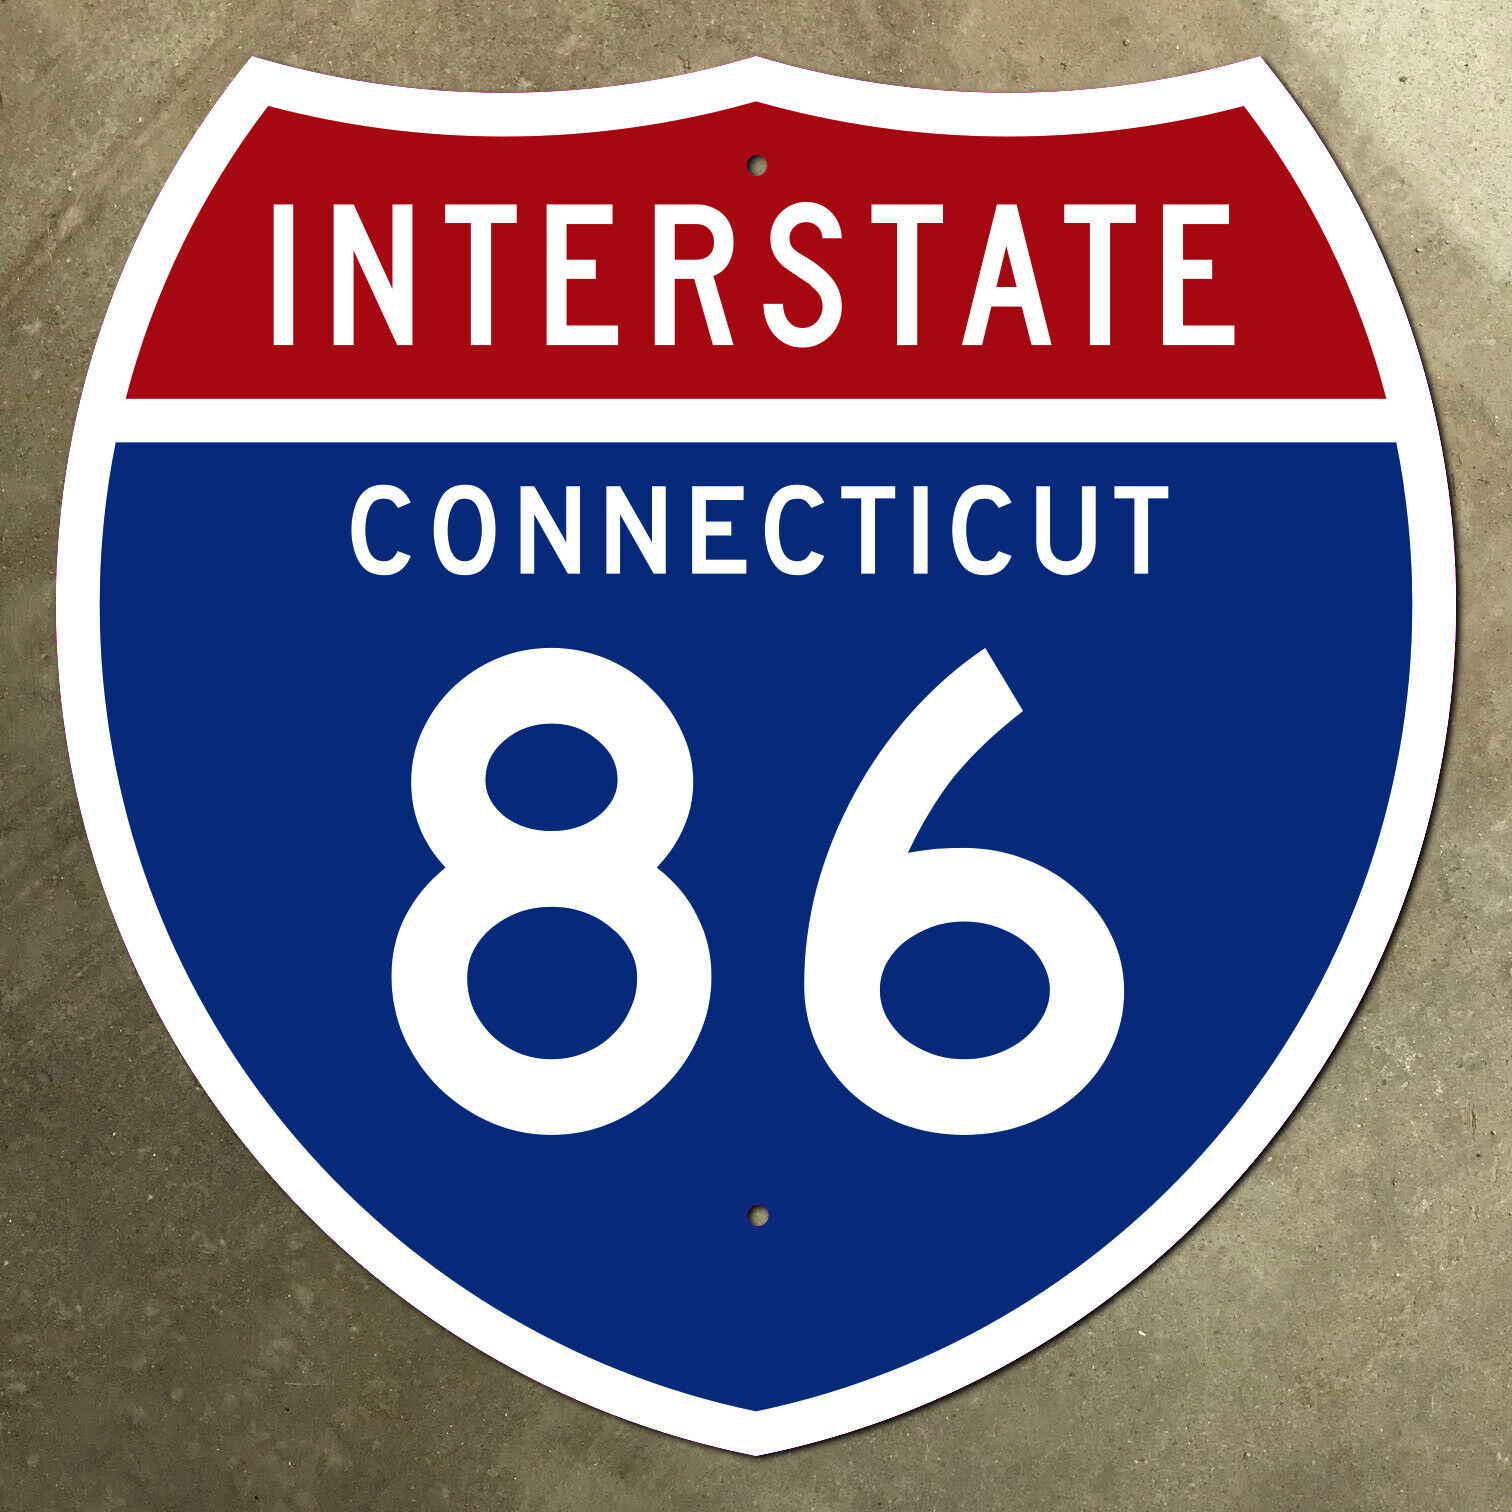 Connecticut interstate 86 Hartford highway route marker road sign 1957 12x12